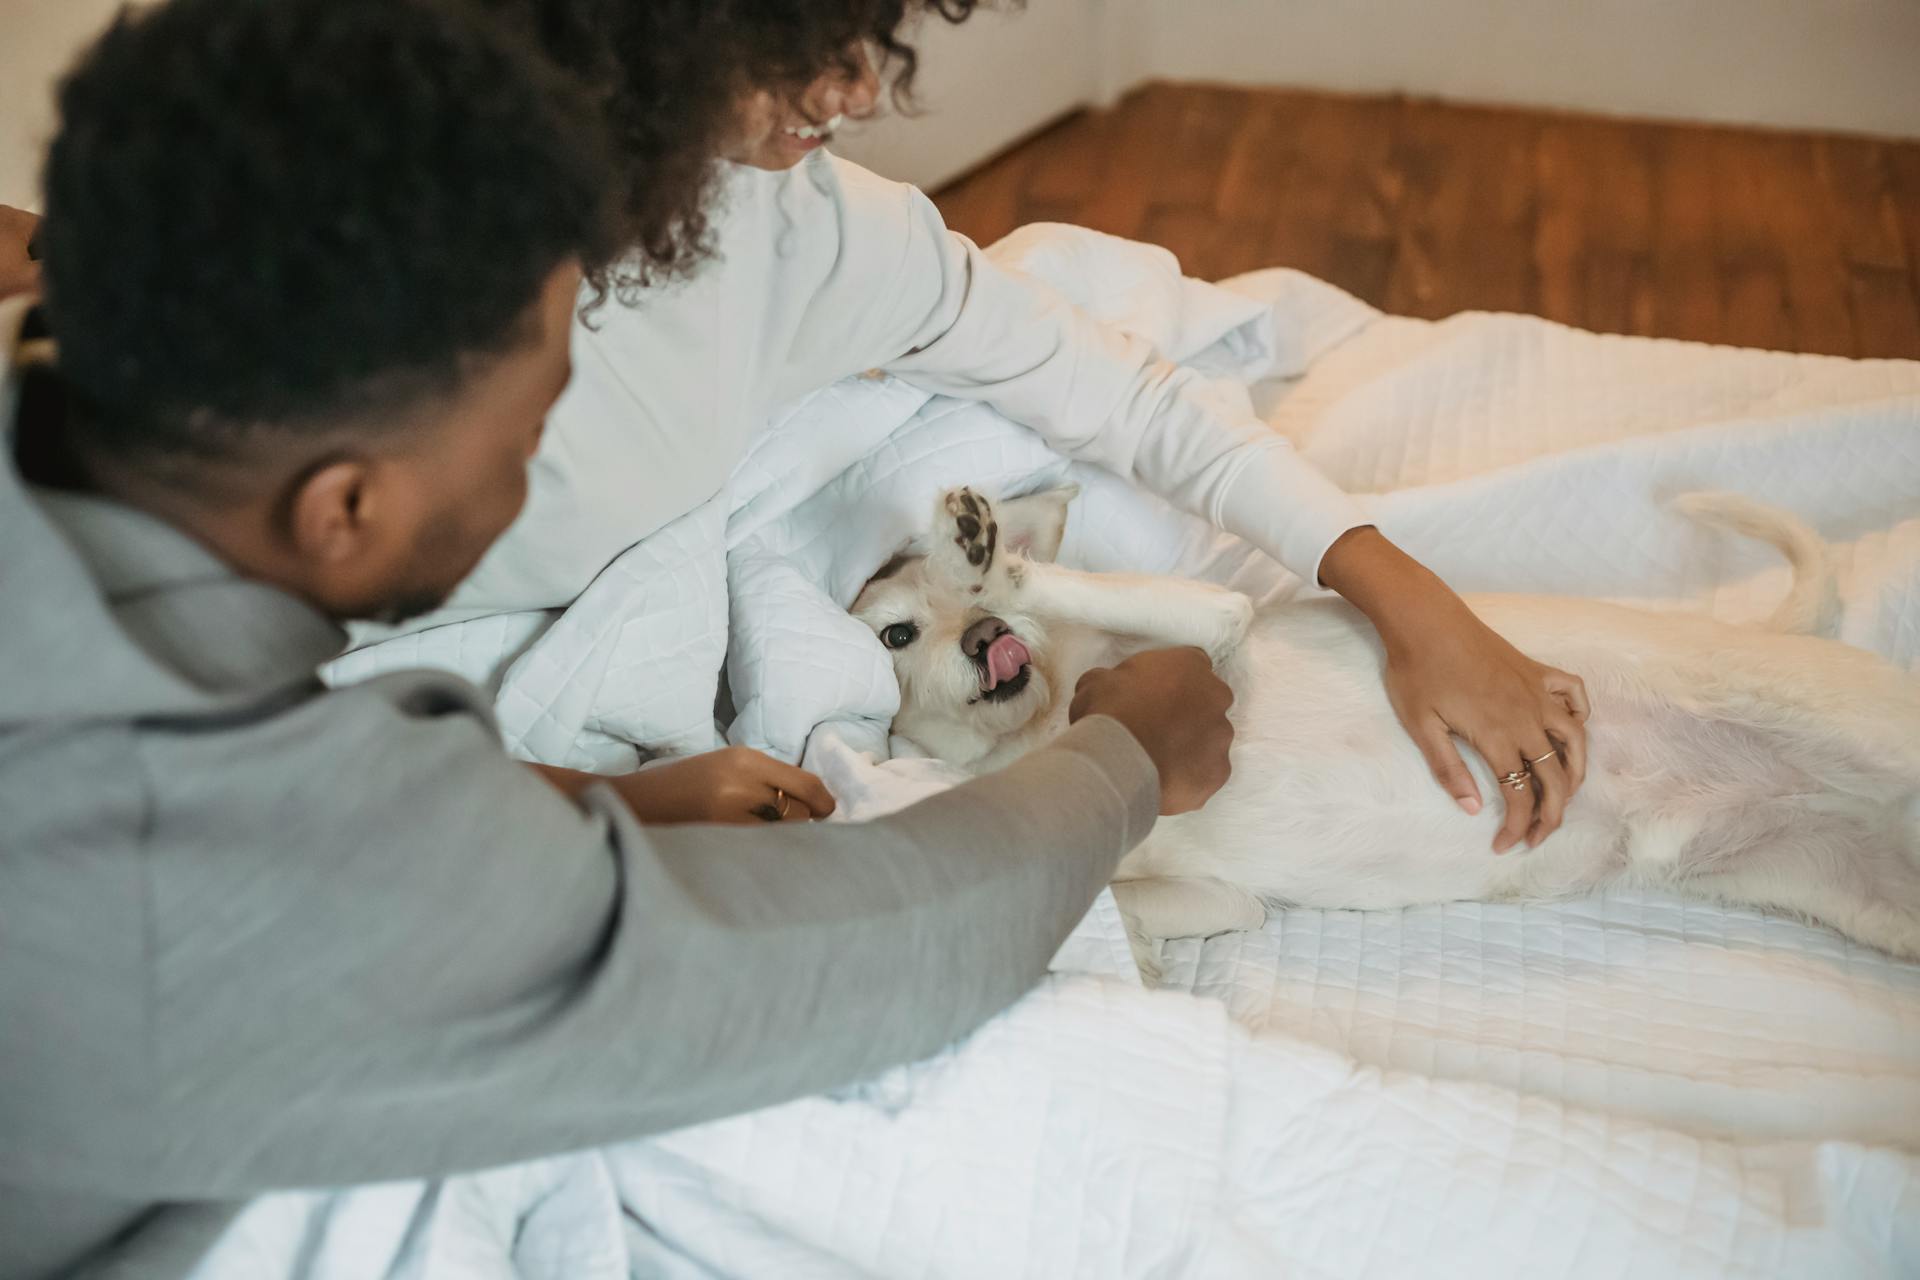 A couple playing with a dog in bed